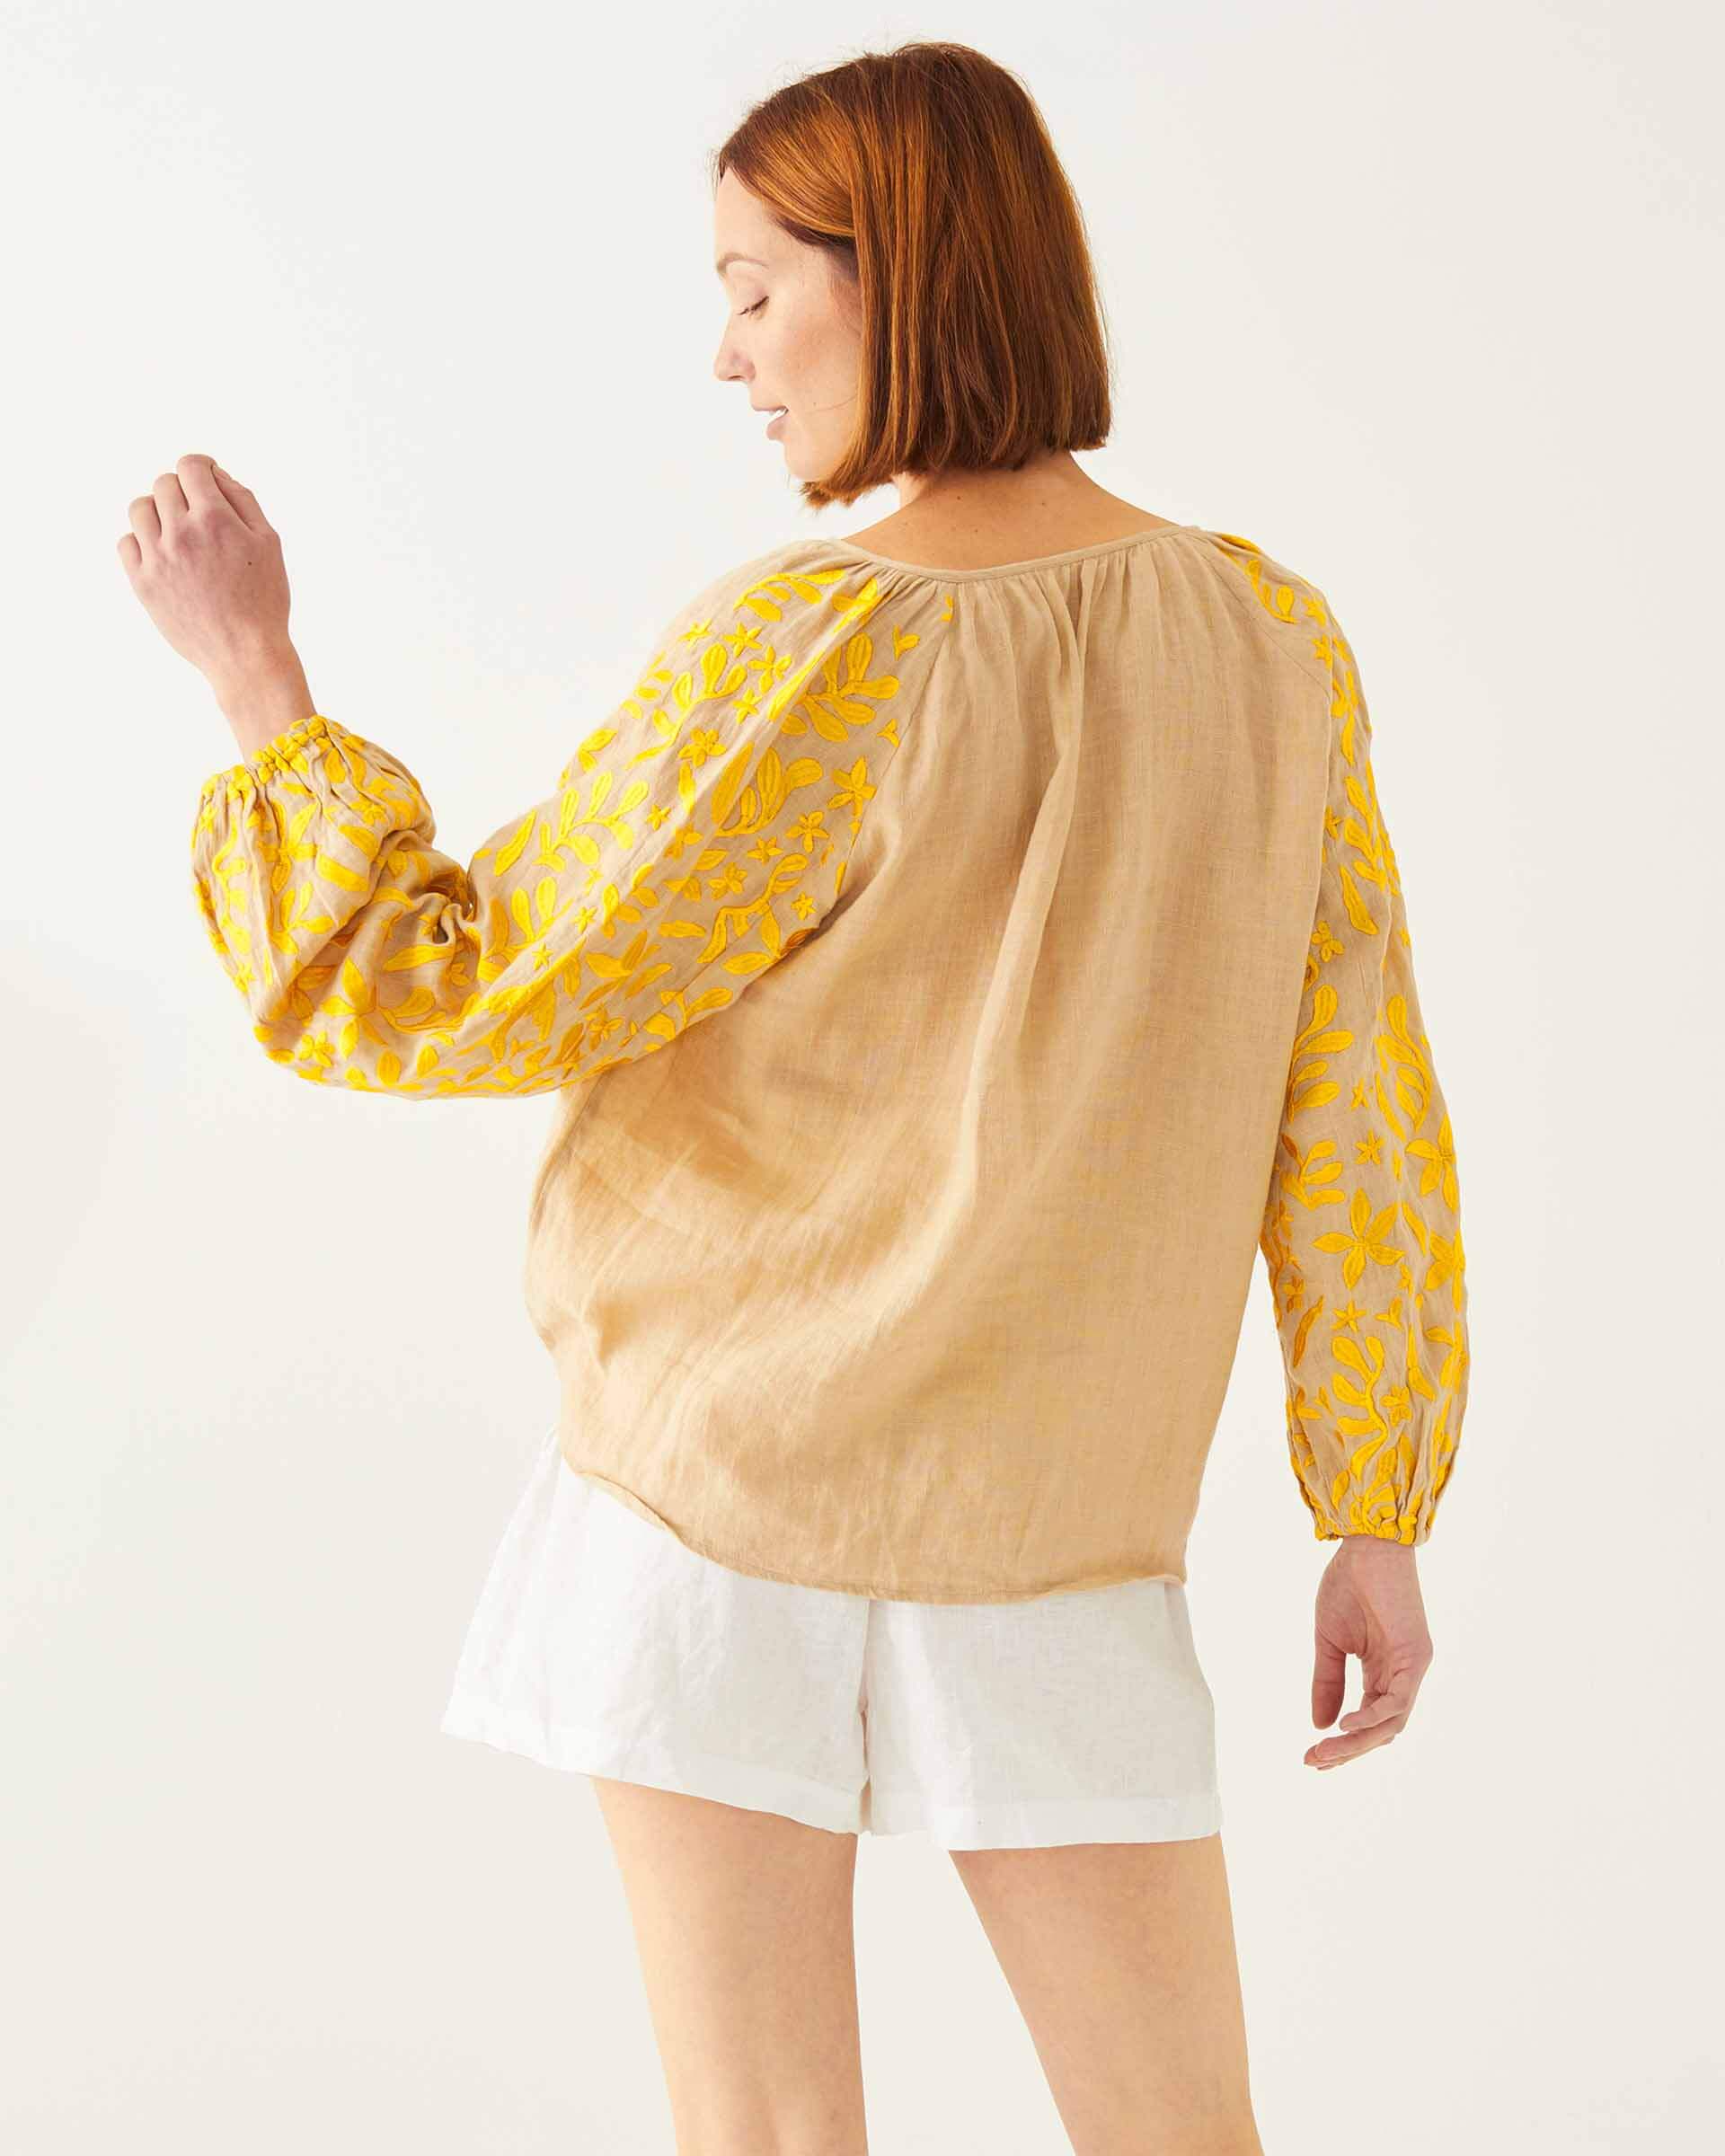 female wearing tan and yellow embroidered blouse with vines and birds backwards on white background